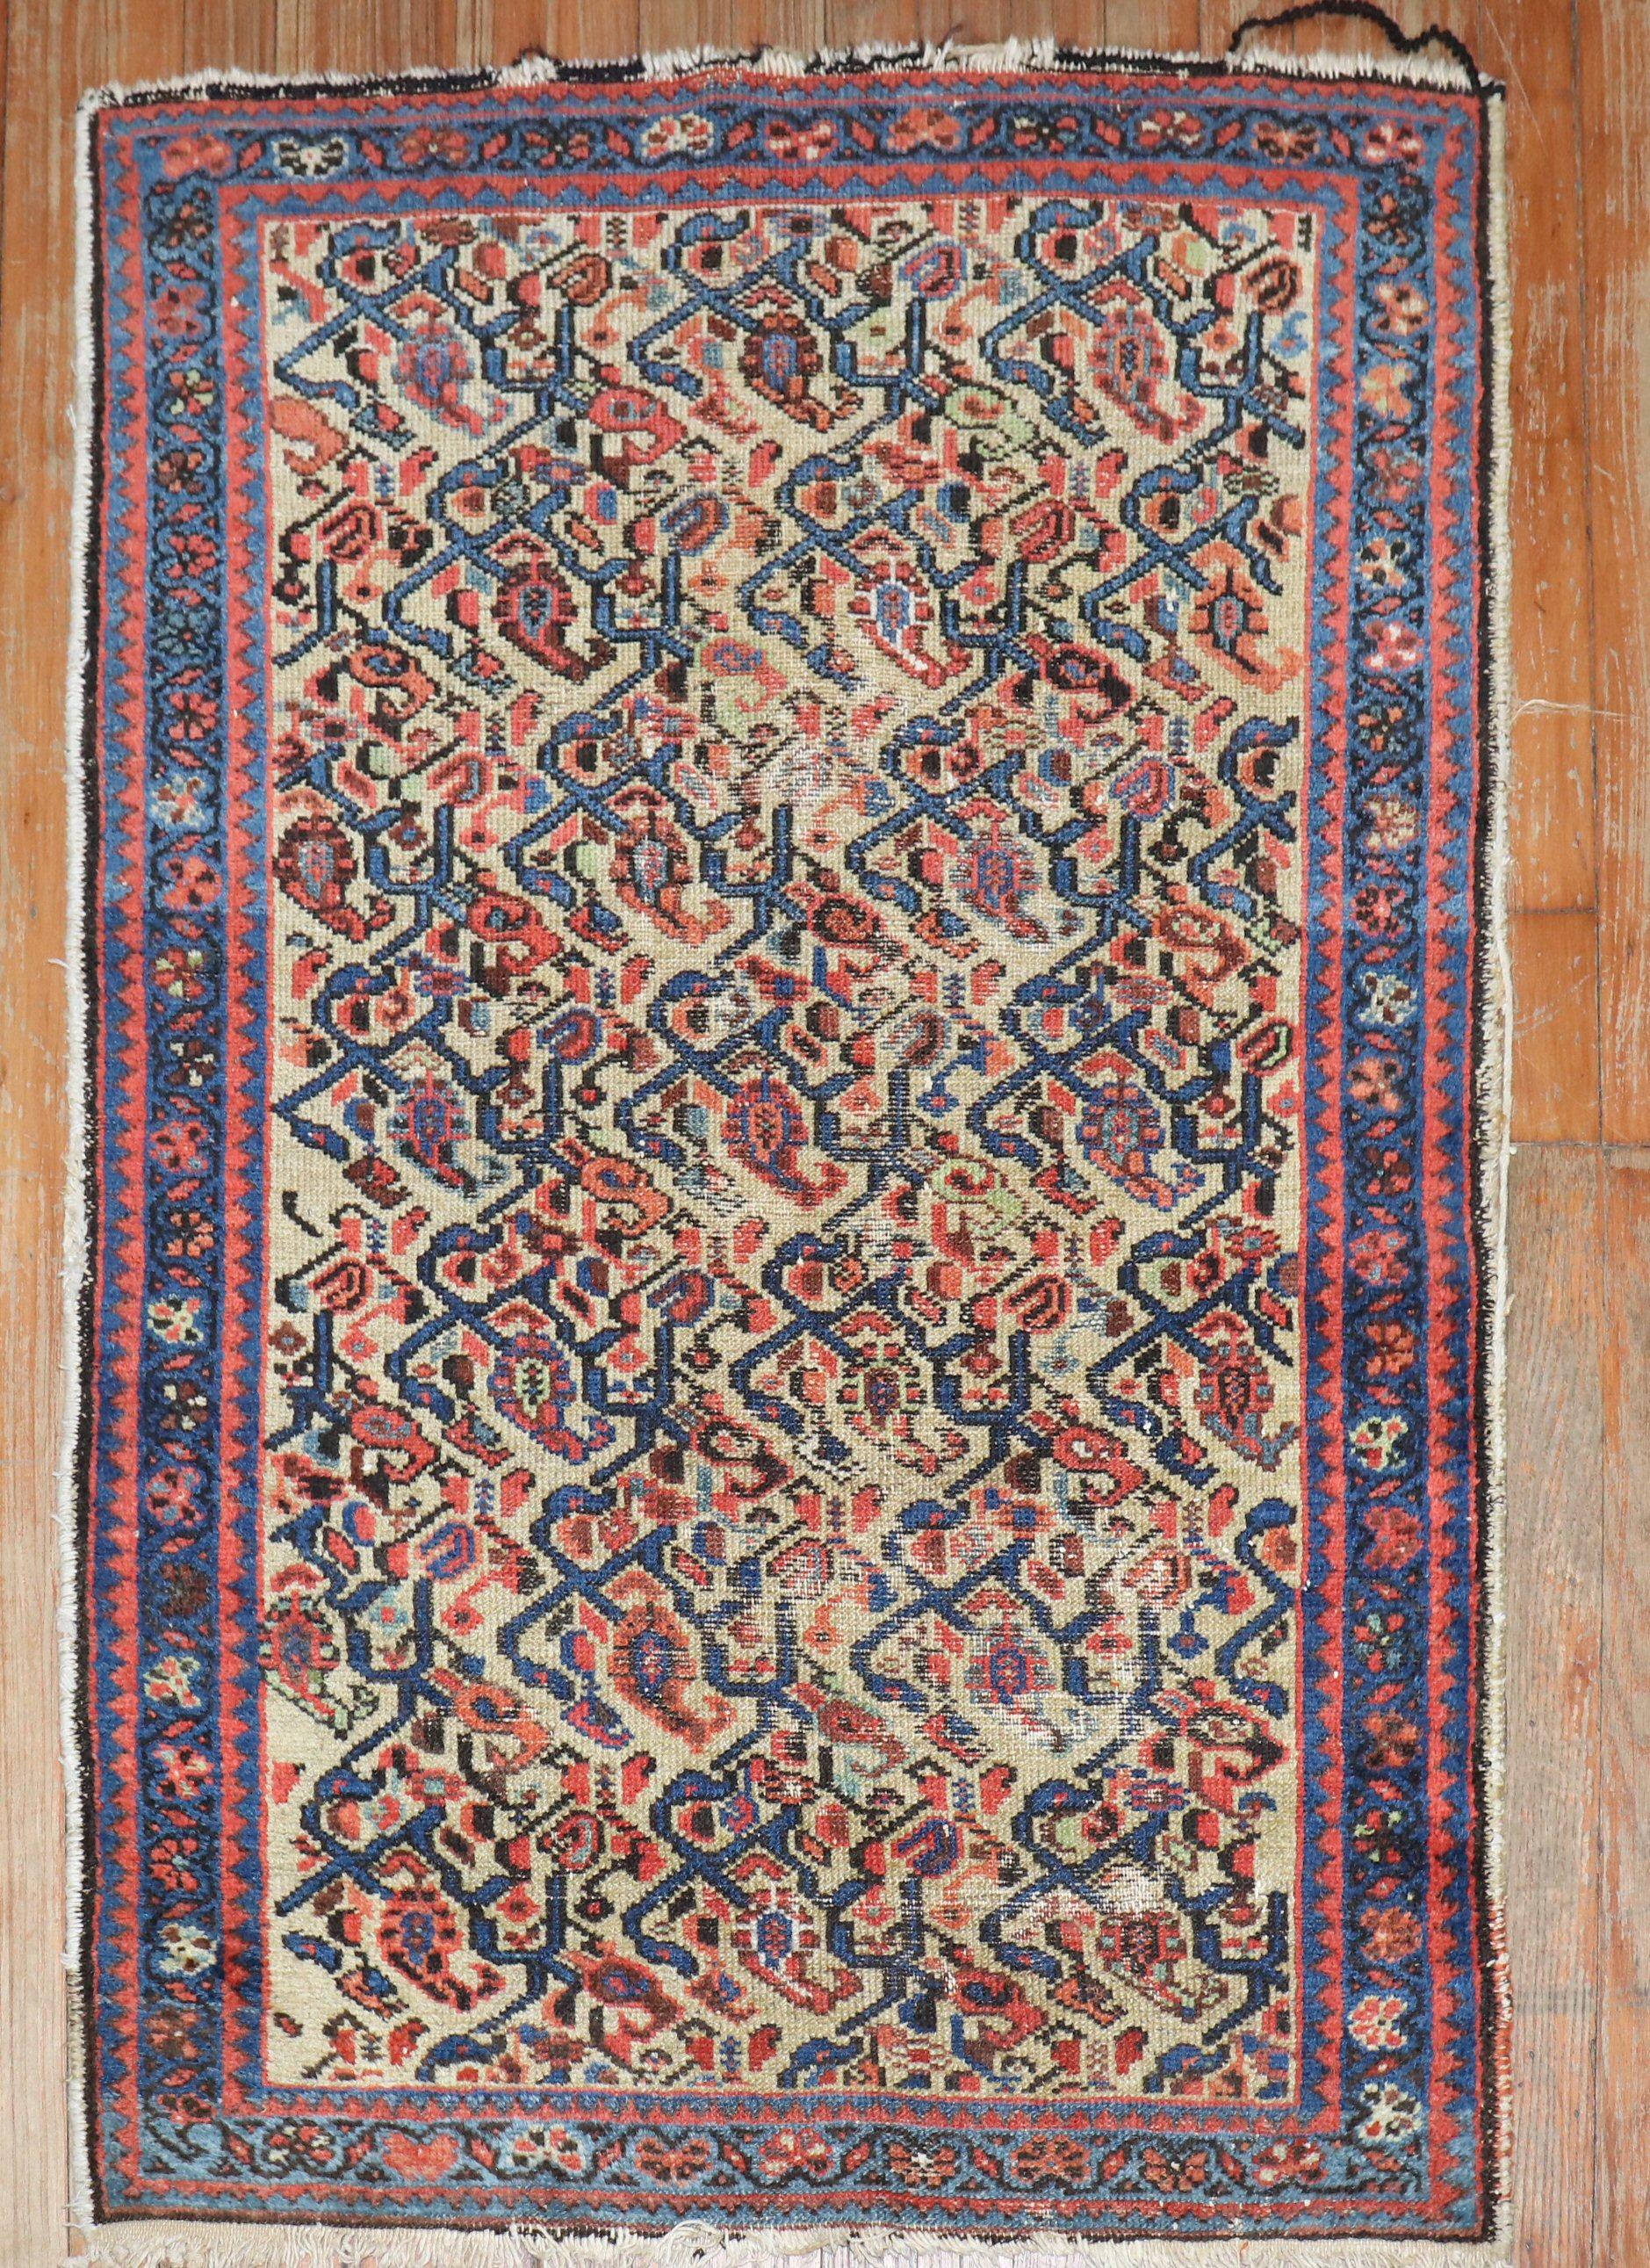 Early 20th Century Persian Malayer Rug

Measures: 2'10'' x 4'1''.